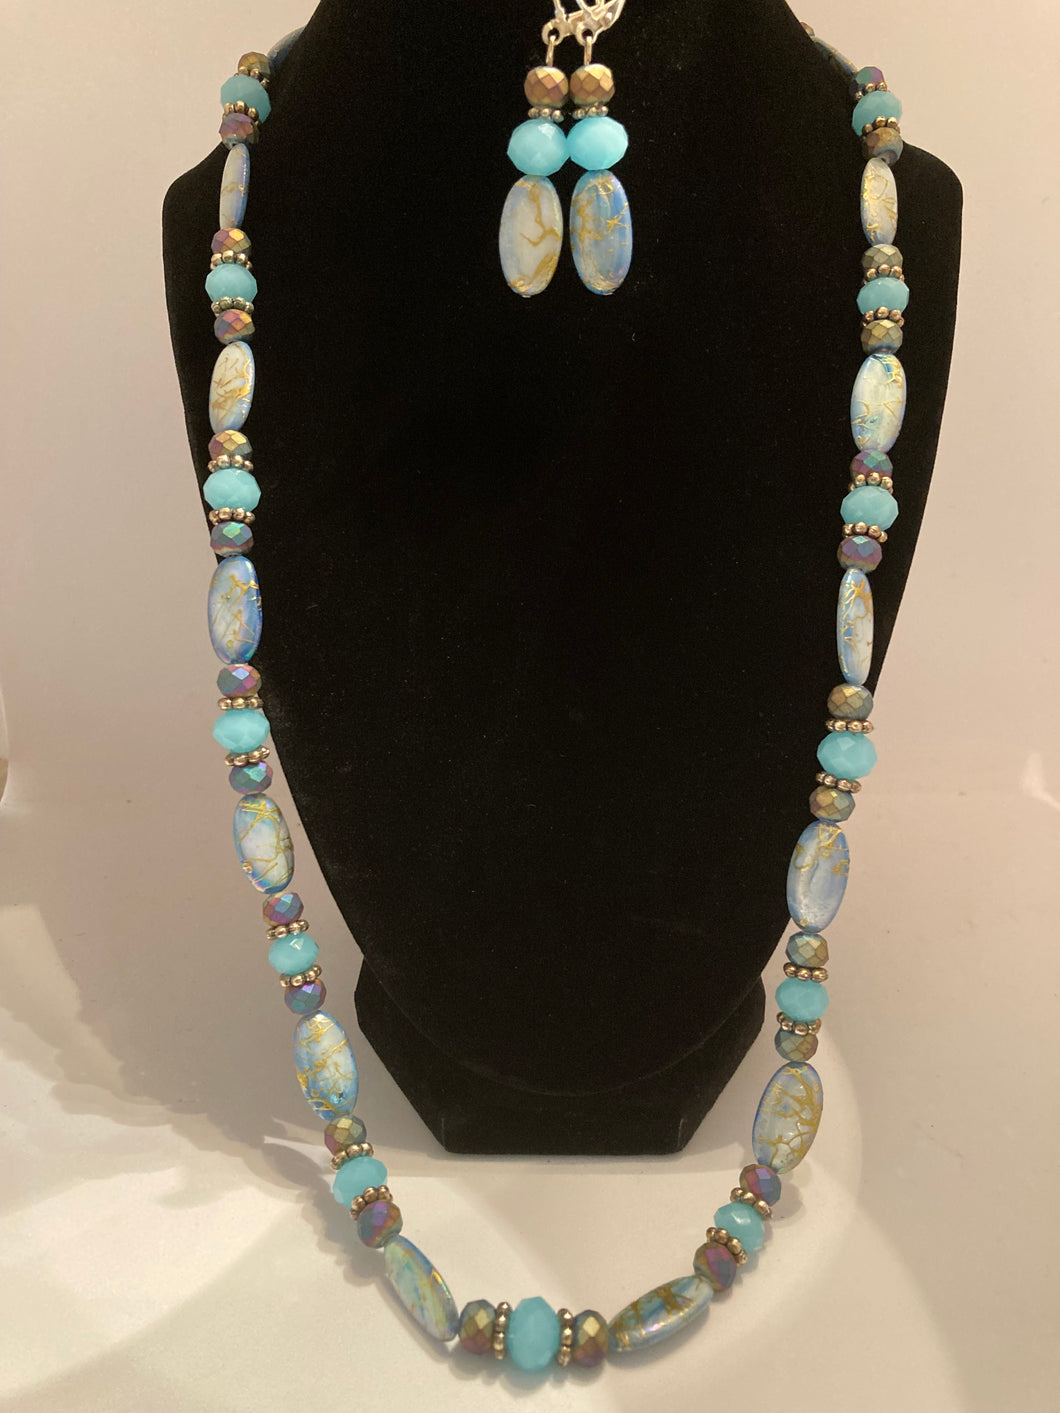 Novelty oval beads with matte multi-color stone beads necklace and matching earrings.